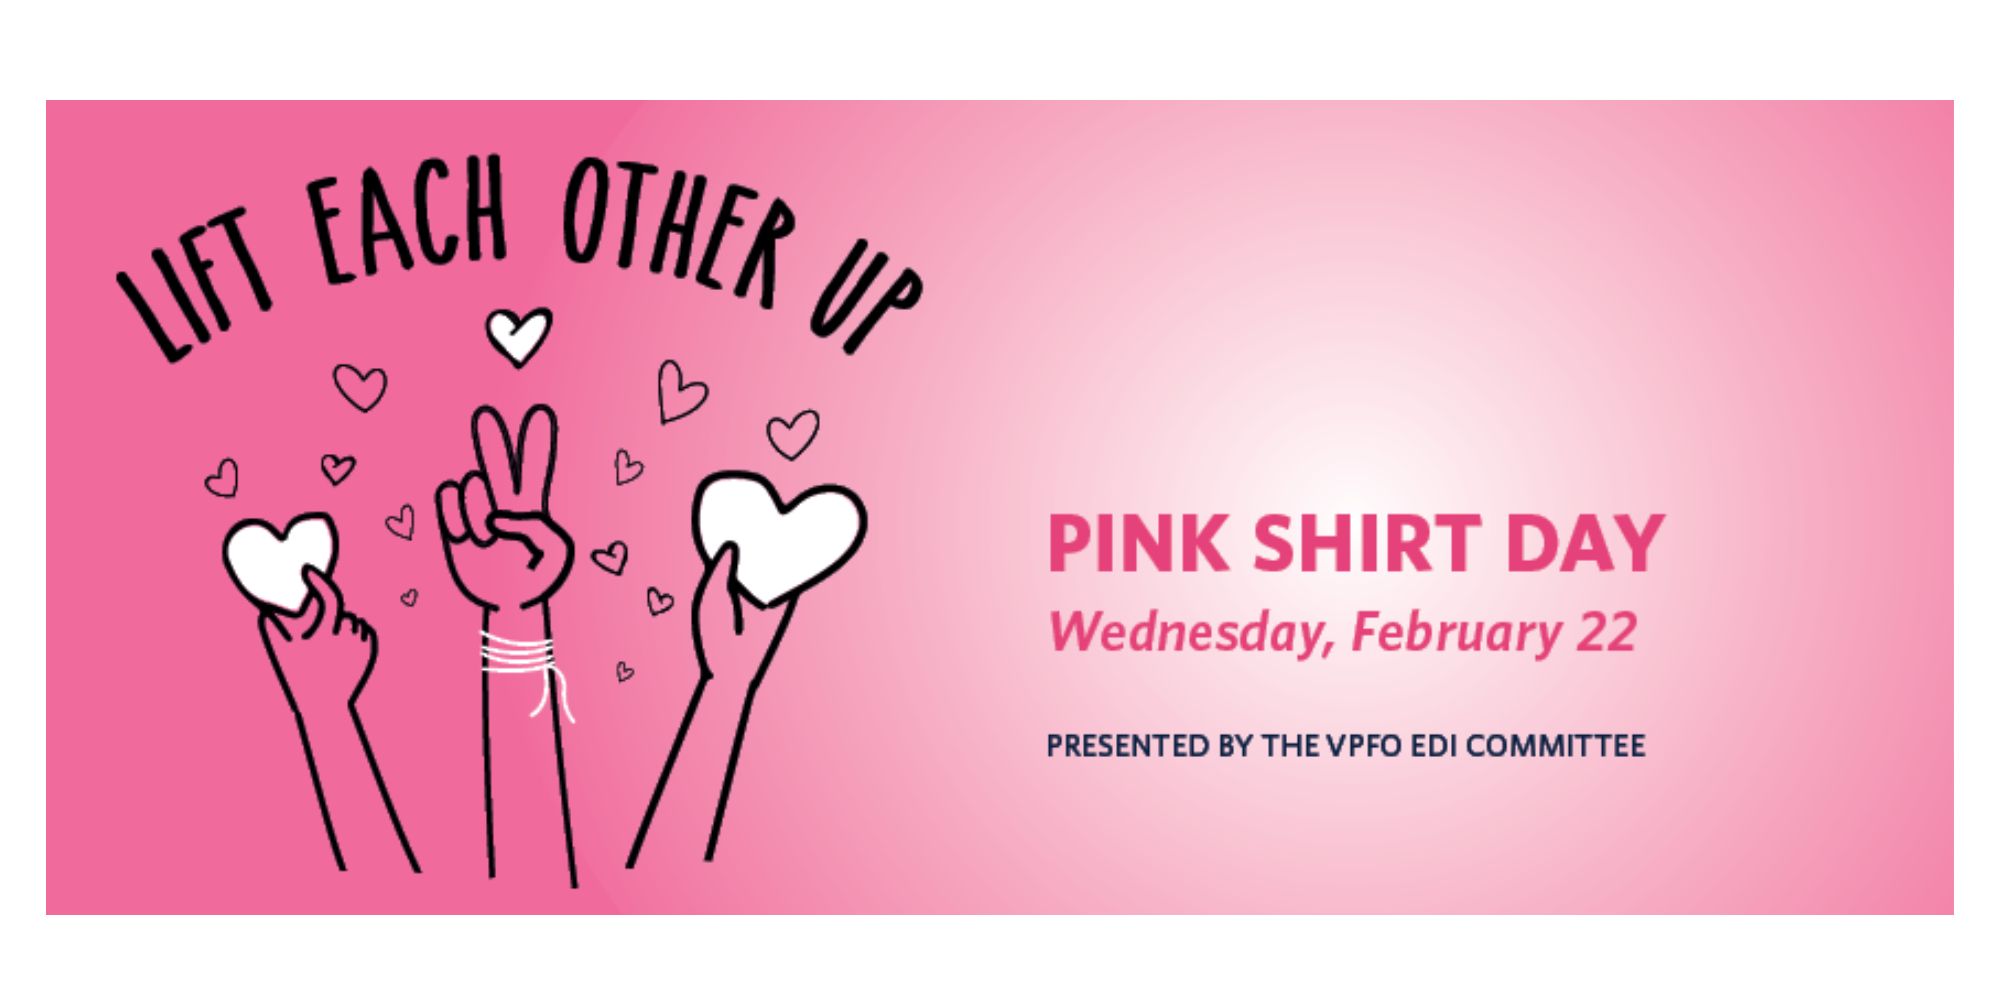 Pink Shirt Day (February 22)